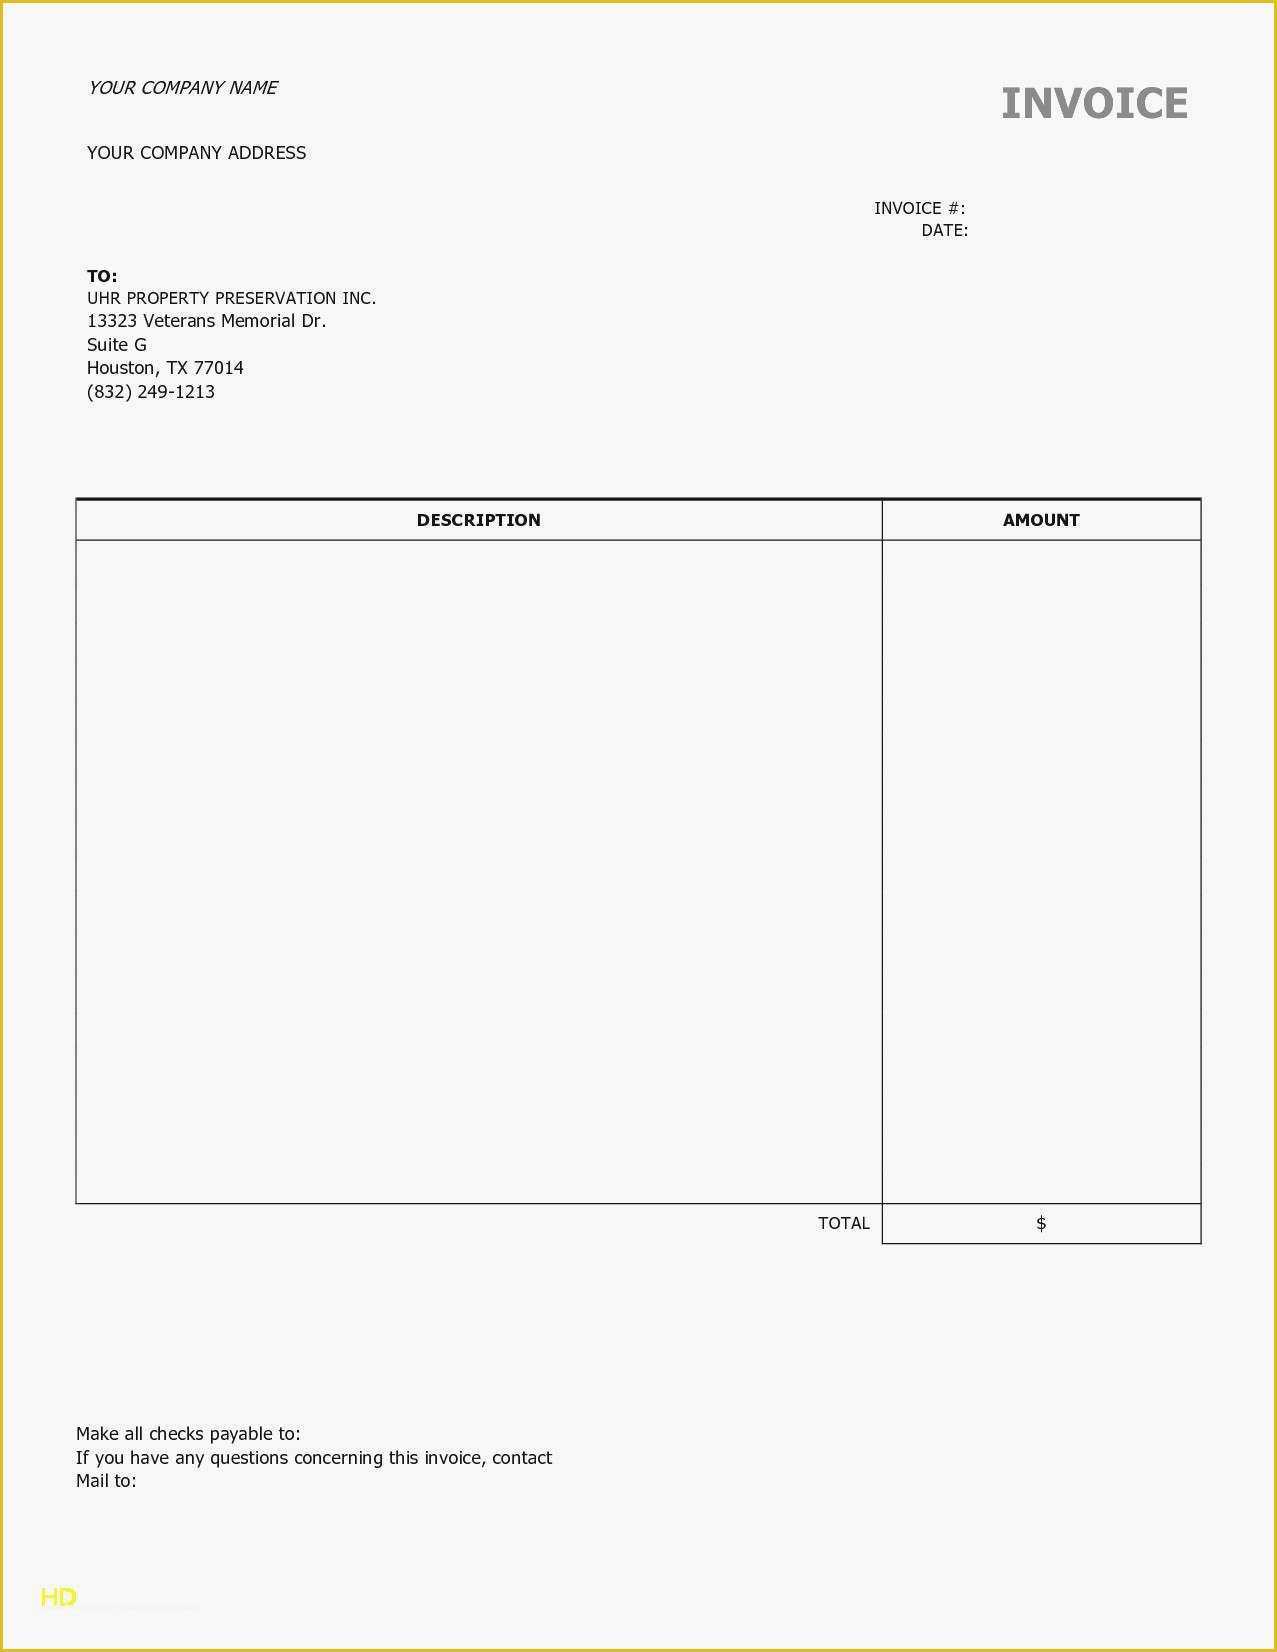 Independent Contractor Invoice Template Free Of Small Business Bud Template Google Sheets Small